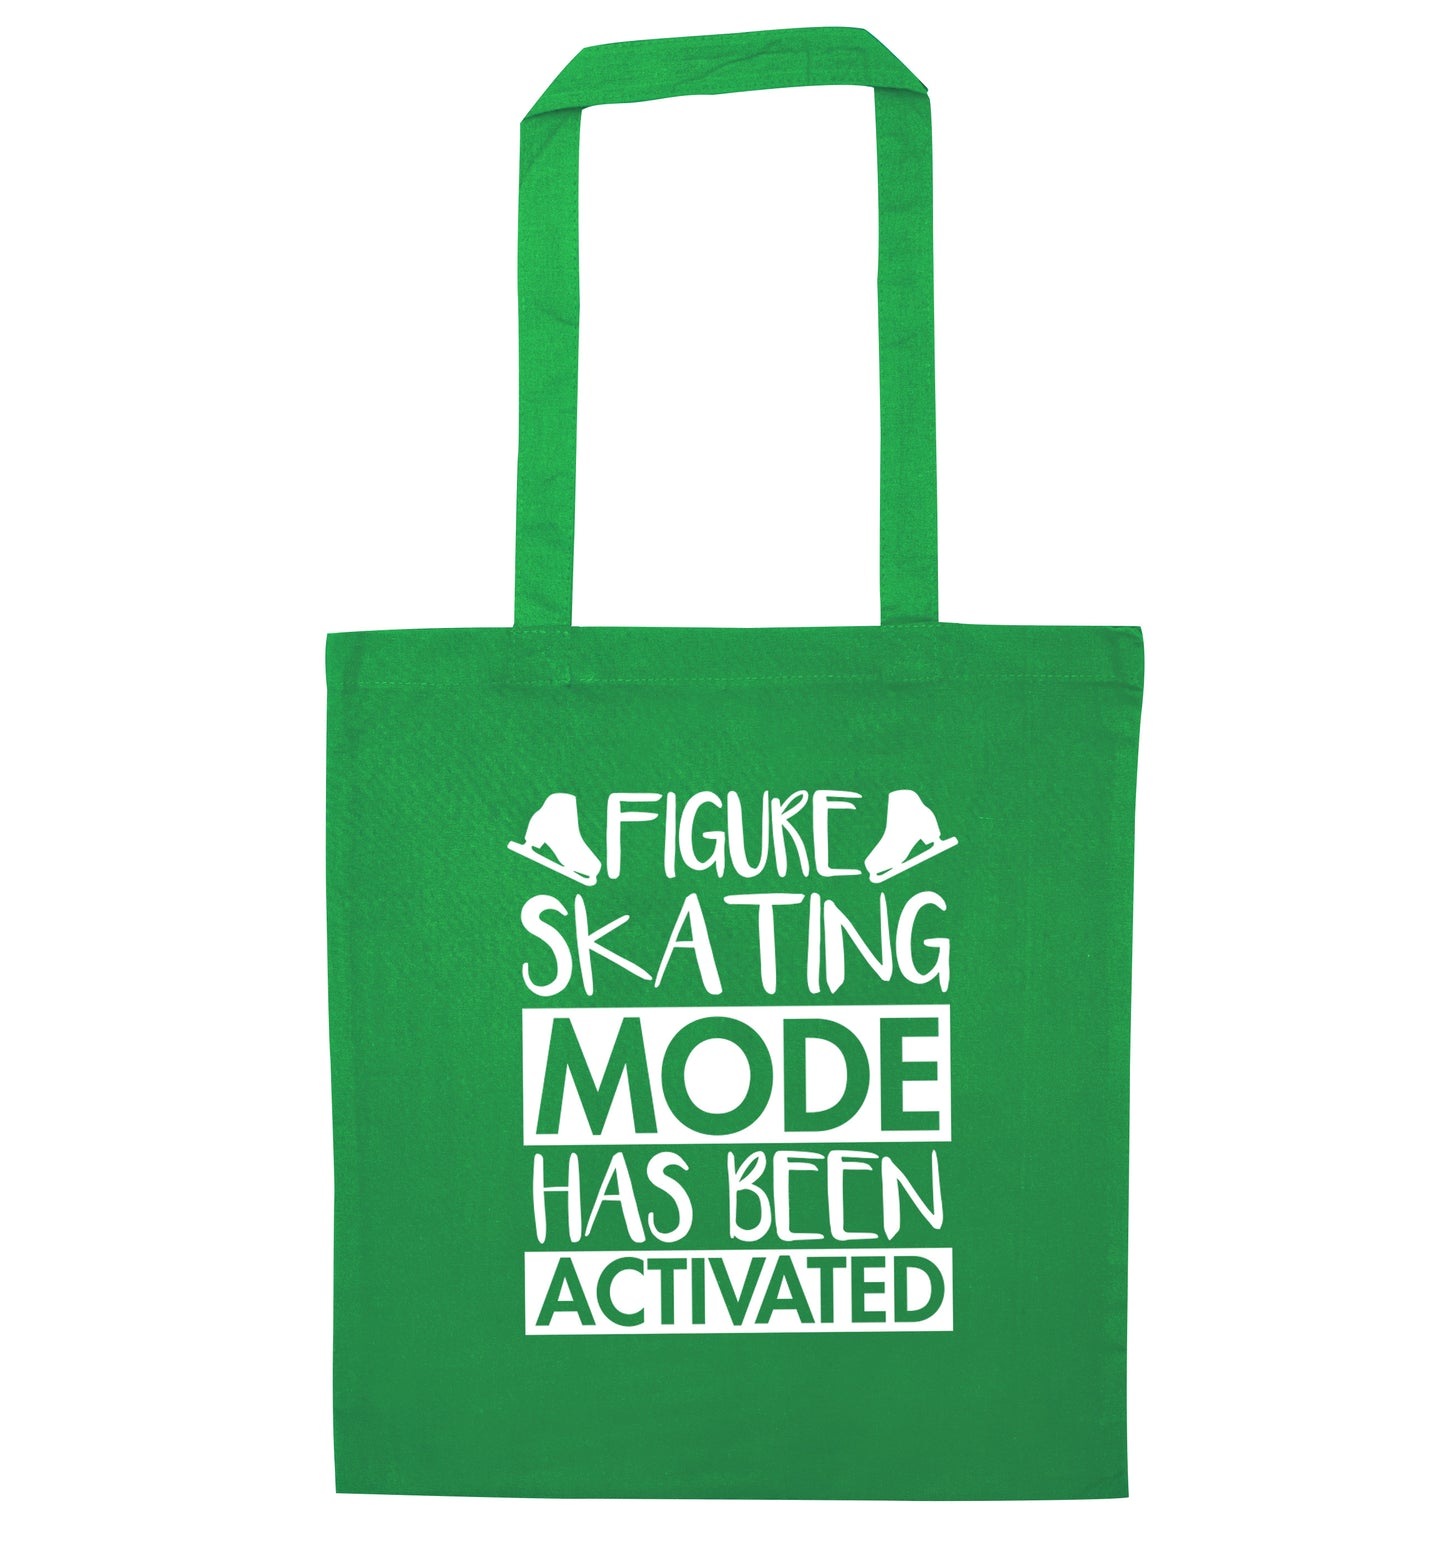 Figure skating mode activated green tote bag